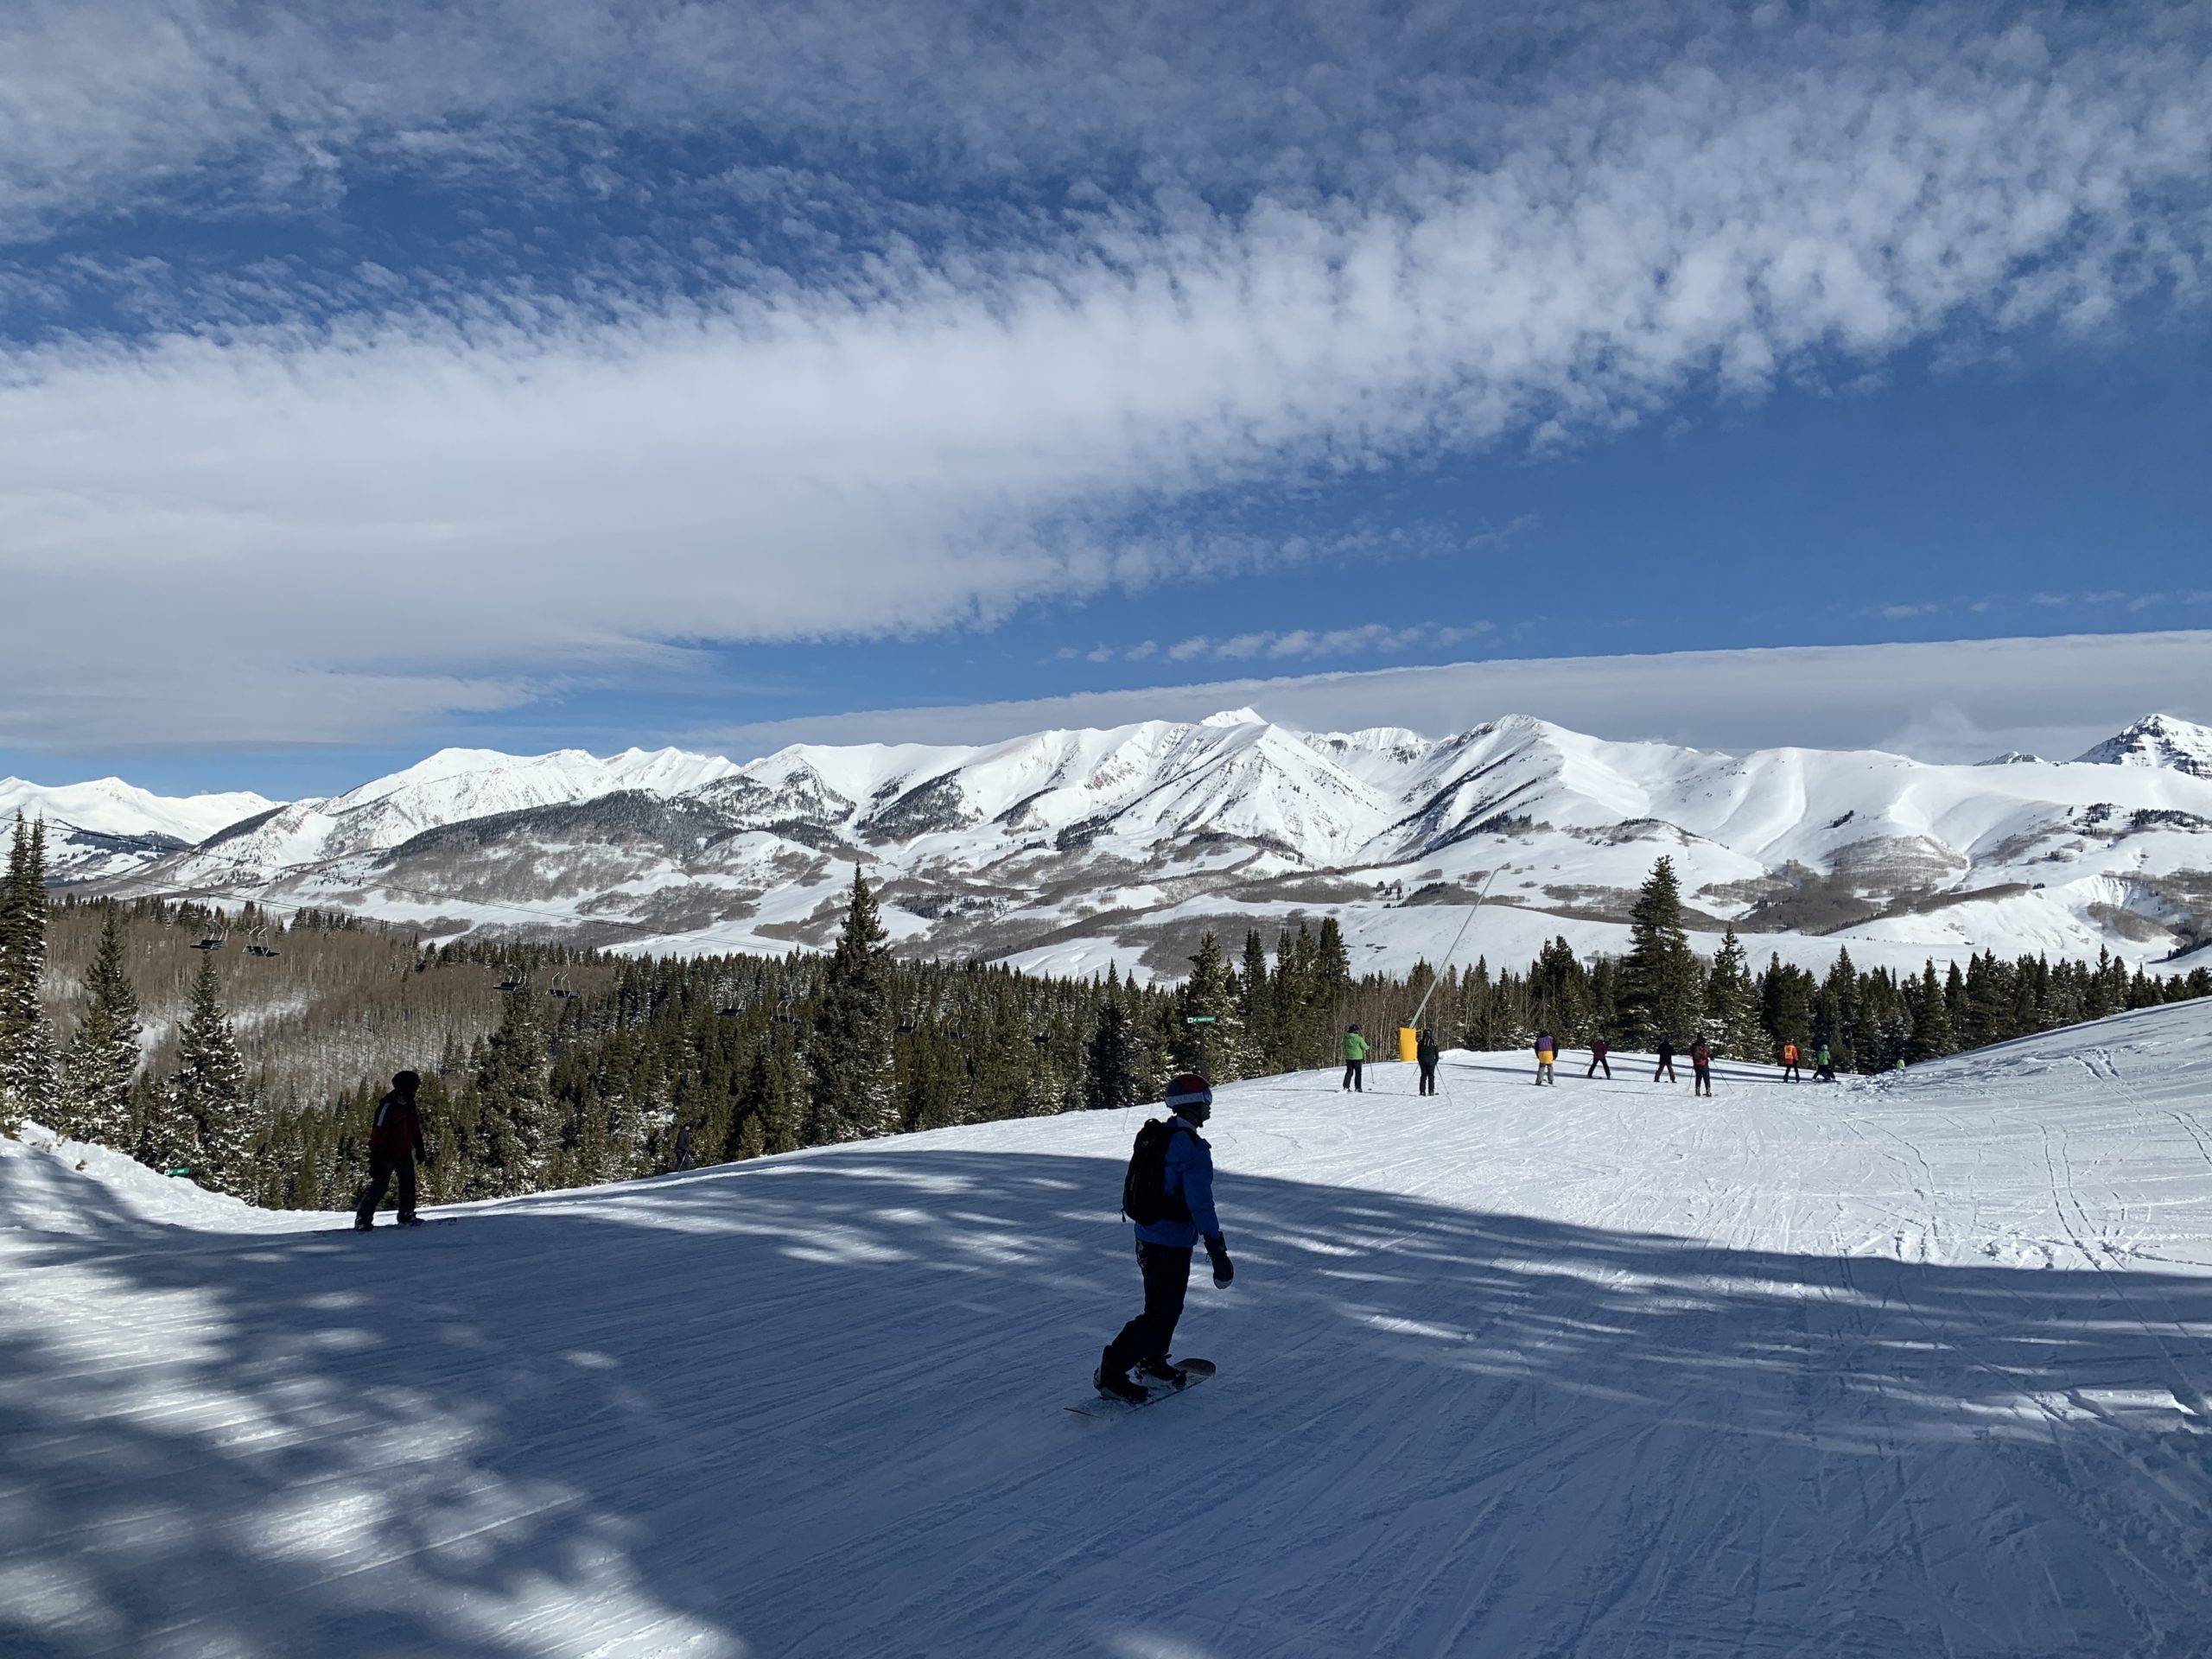 MR. WANDERING’S GUEST BLOG: A REVIEW OF CRESTED BUTTE